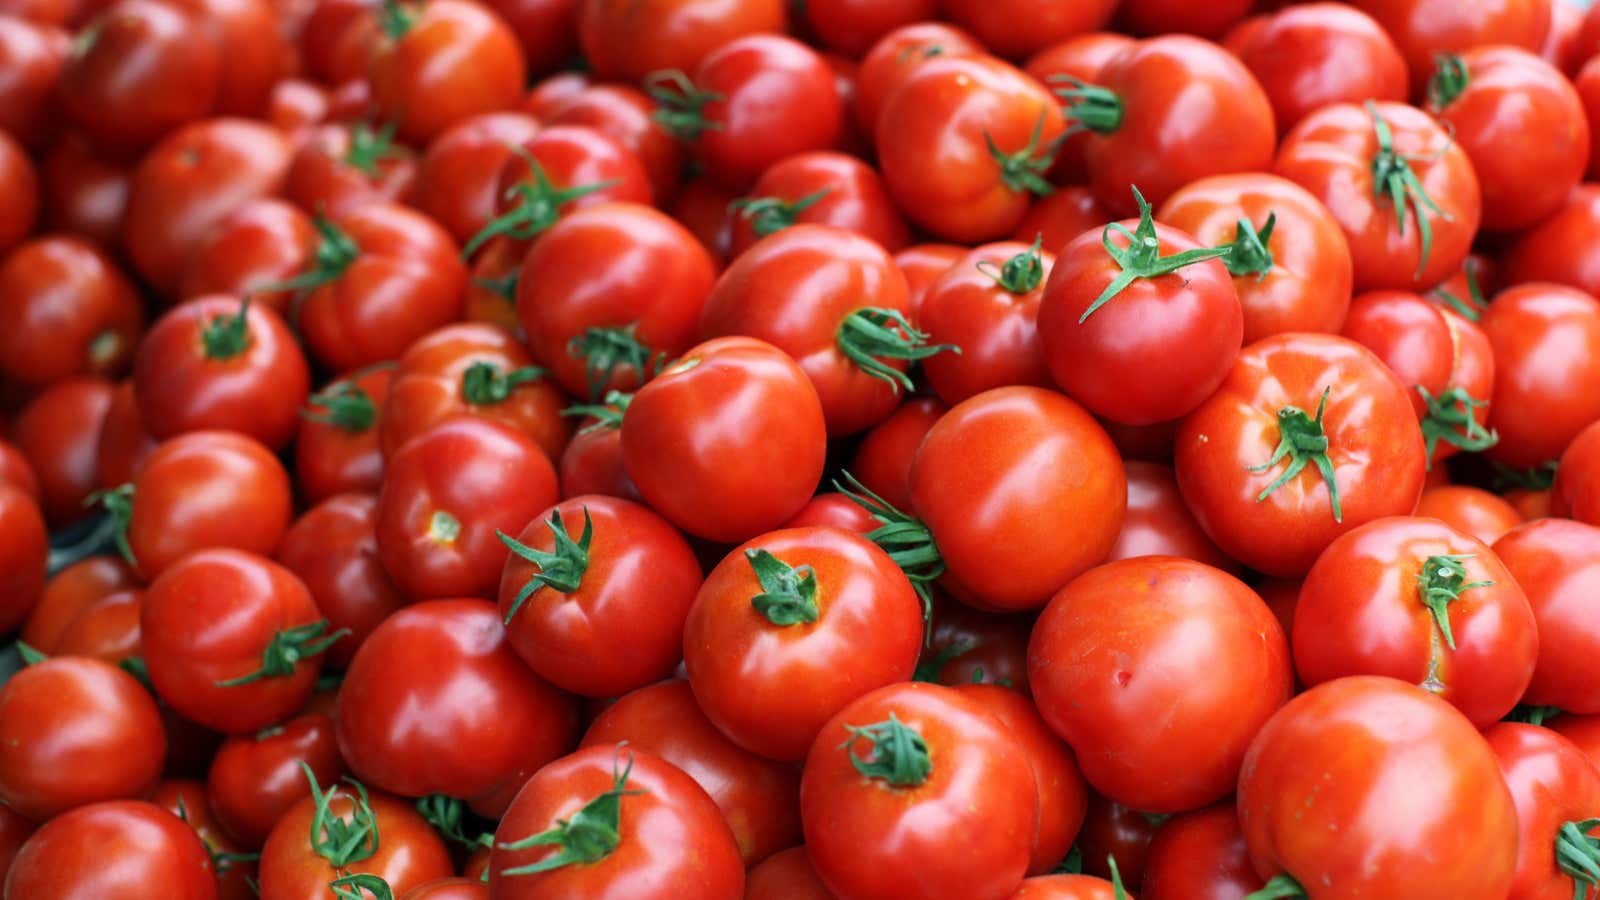 Those organic tomatoes may be doing more harm than good.